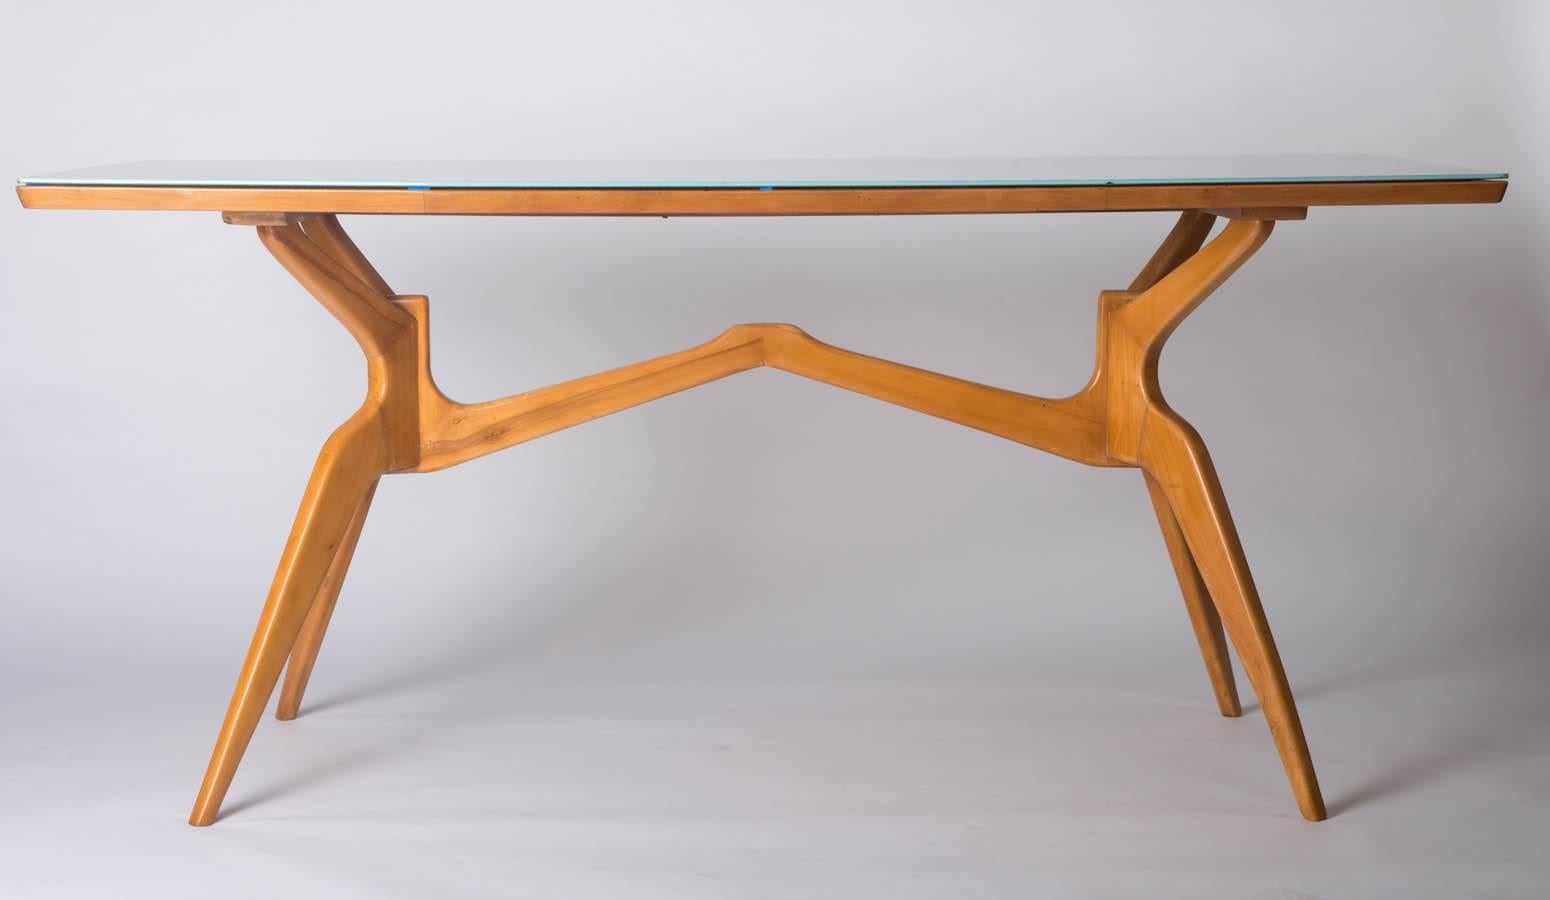 An Italian beech centre table in the style of Franco Campo & Carlo Graffi. The splayed spider legs supporting a rectangular shaped top with modern colored glass, Italy, circa 1950. Measures: 78 H x 170 W x 81 cm D.